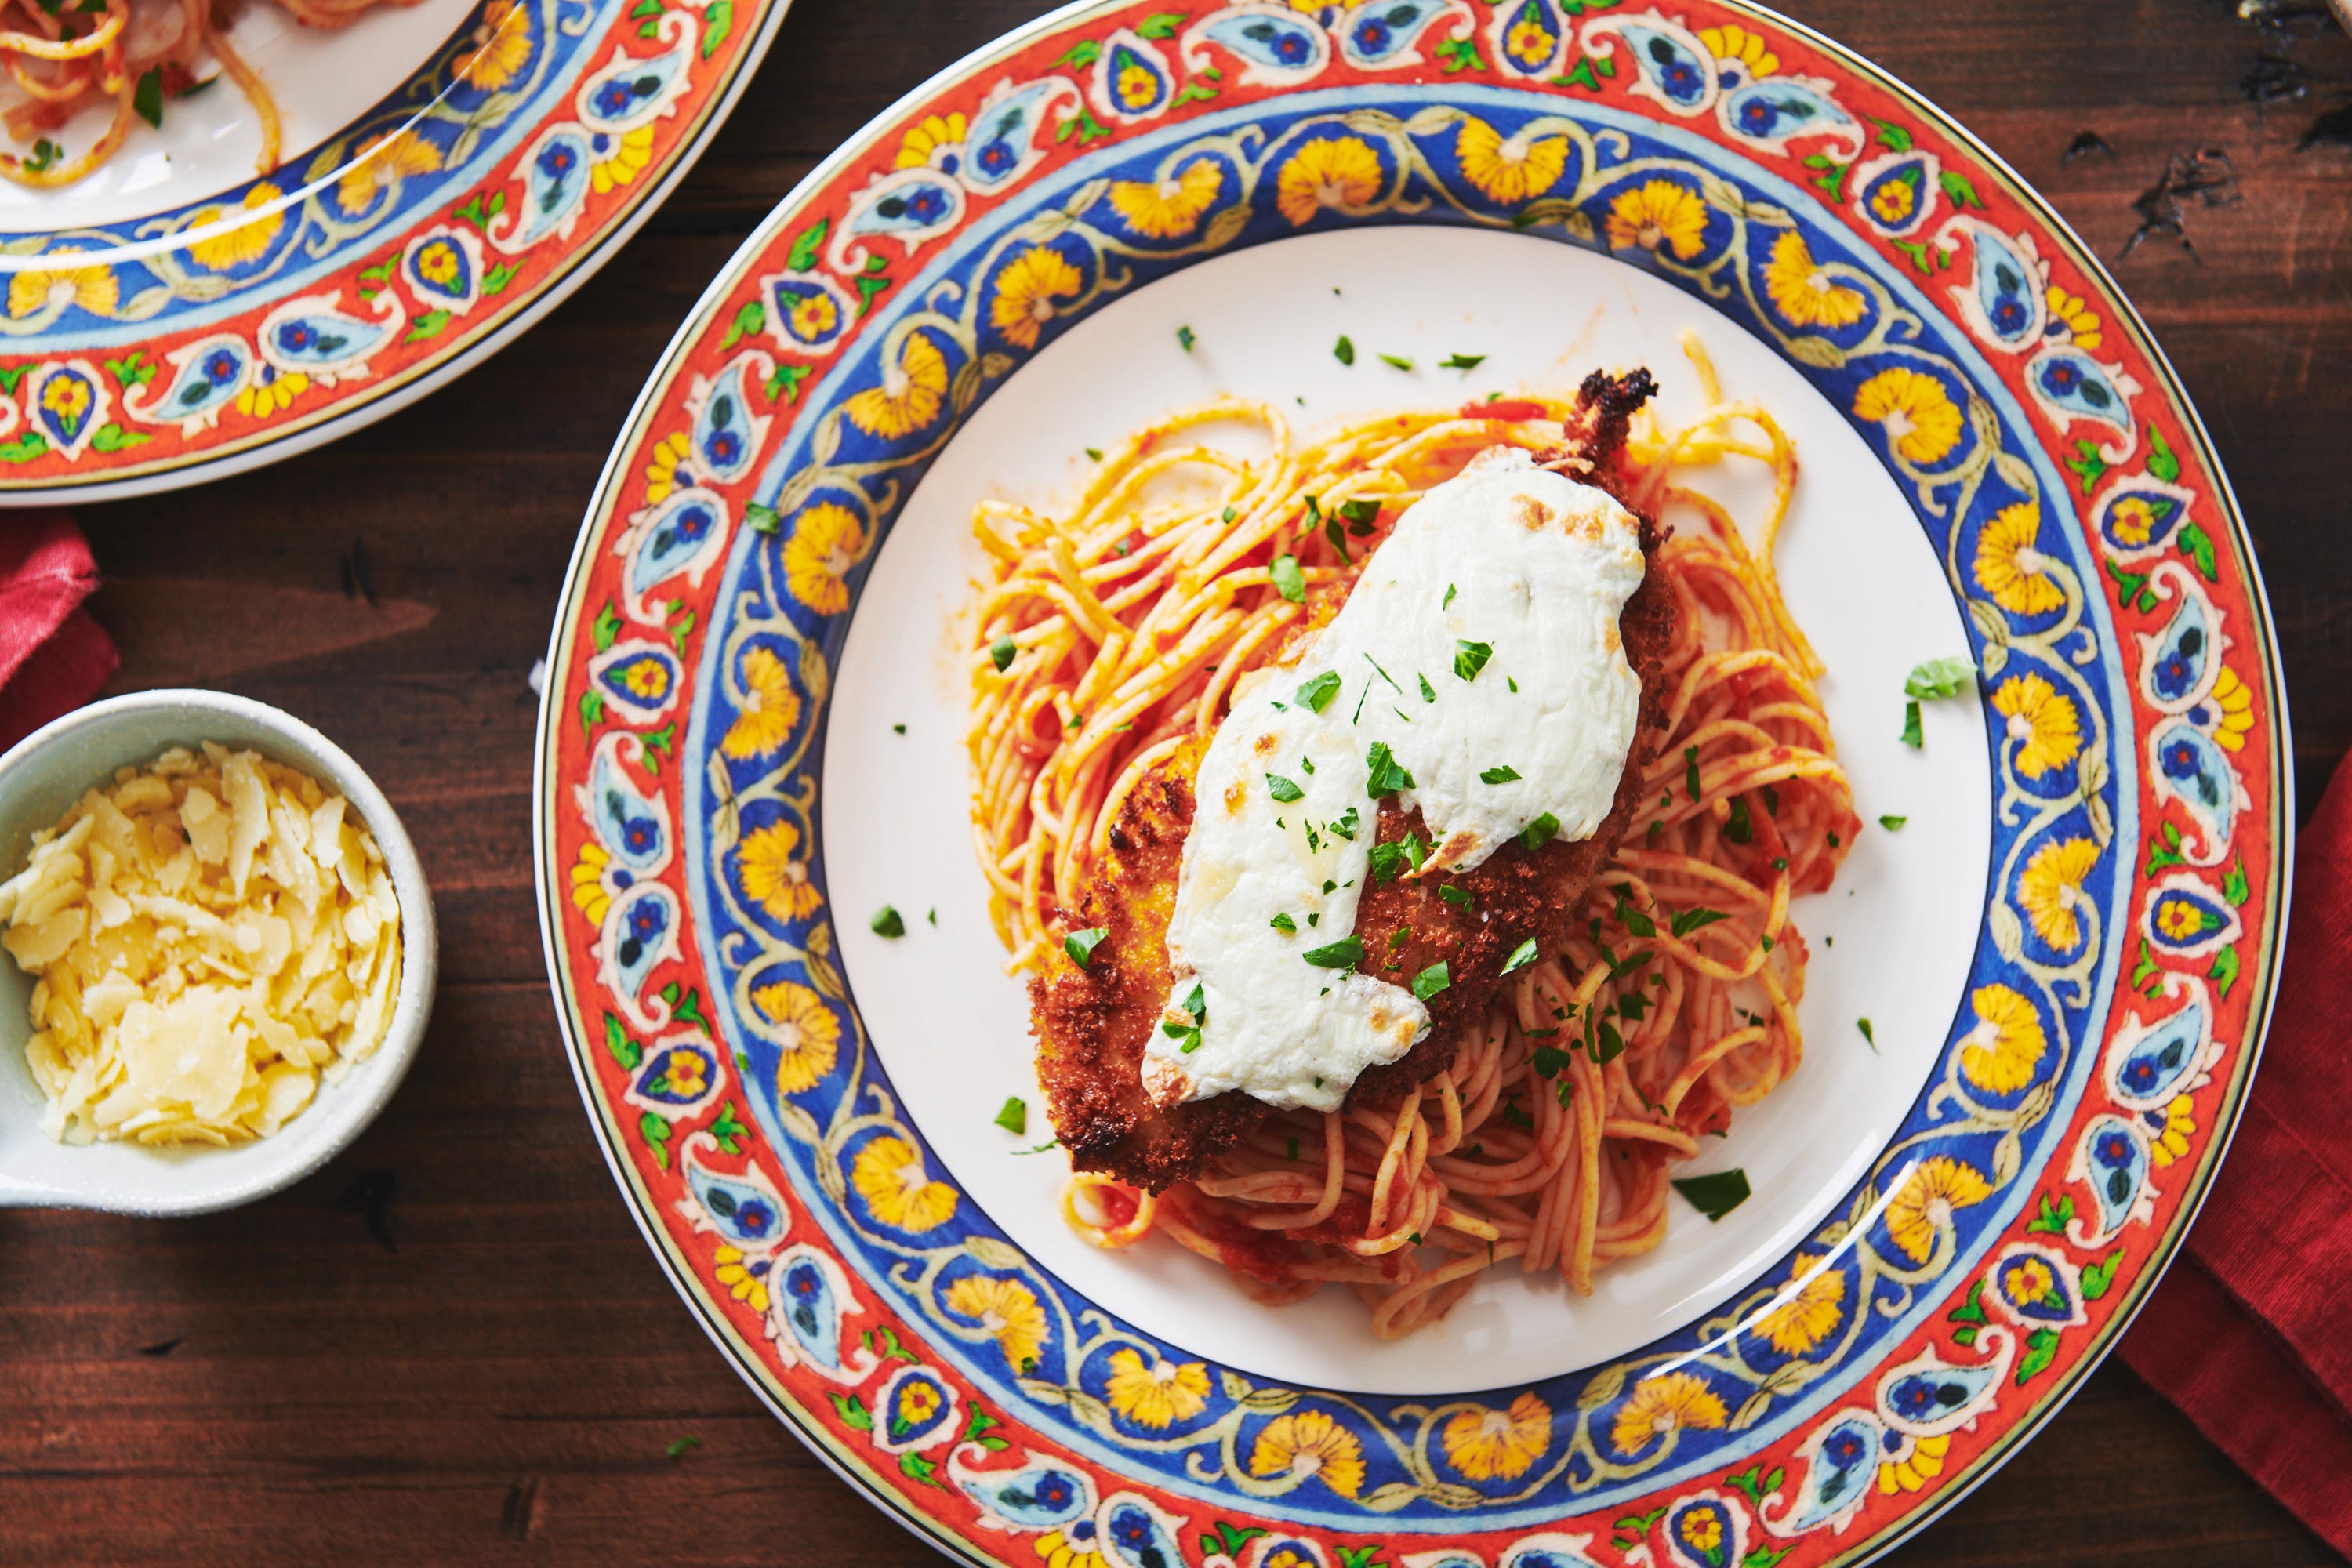 Chicken Parmigiana with spaghetti on a plate with a colorful border.